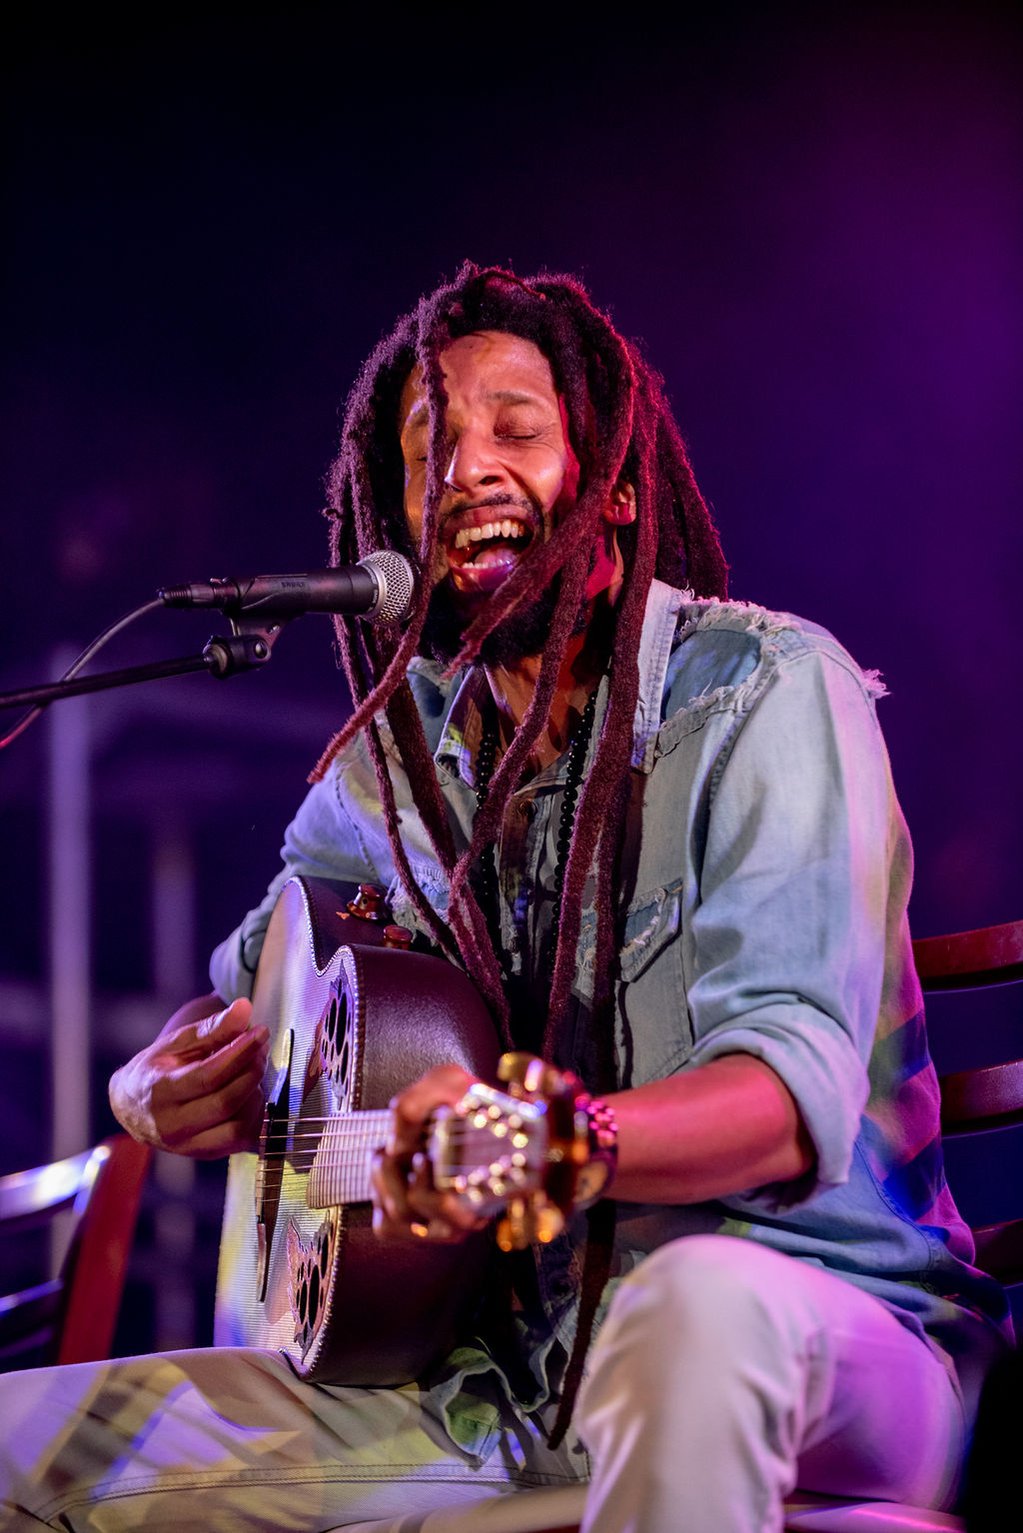 The Wailers Ft. Julian Marley live from Old School Square, Delray, Florida. Photography credit Julia Rose Photo